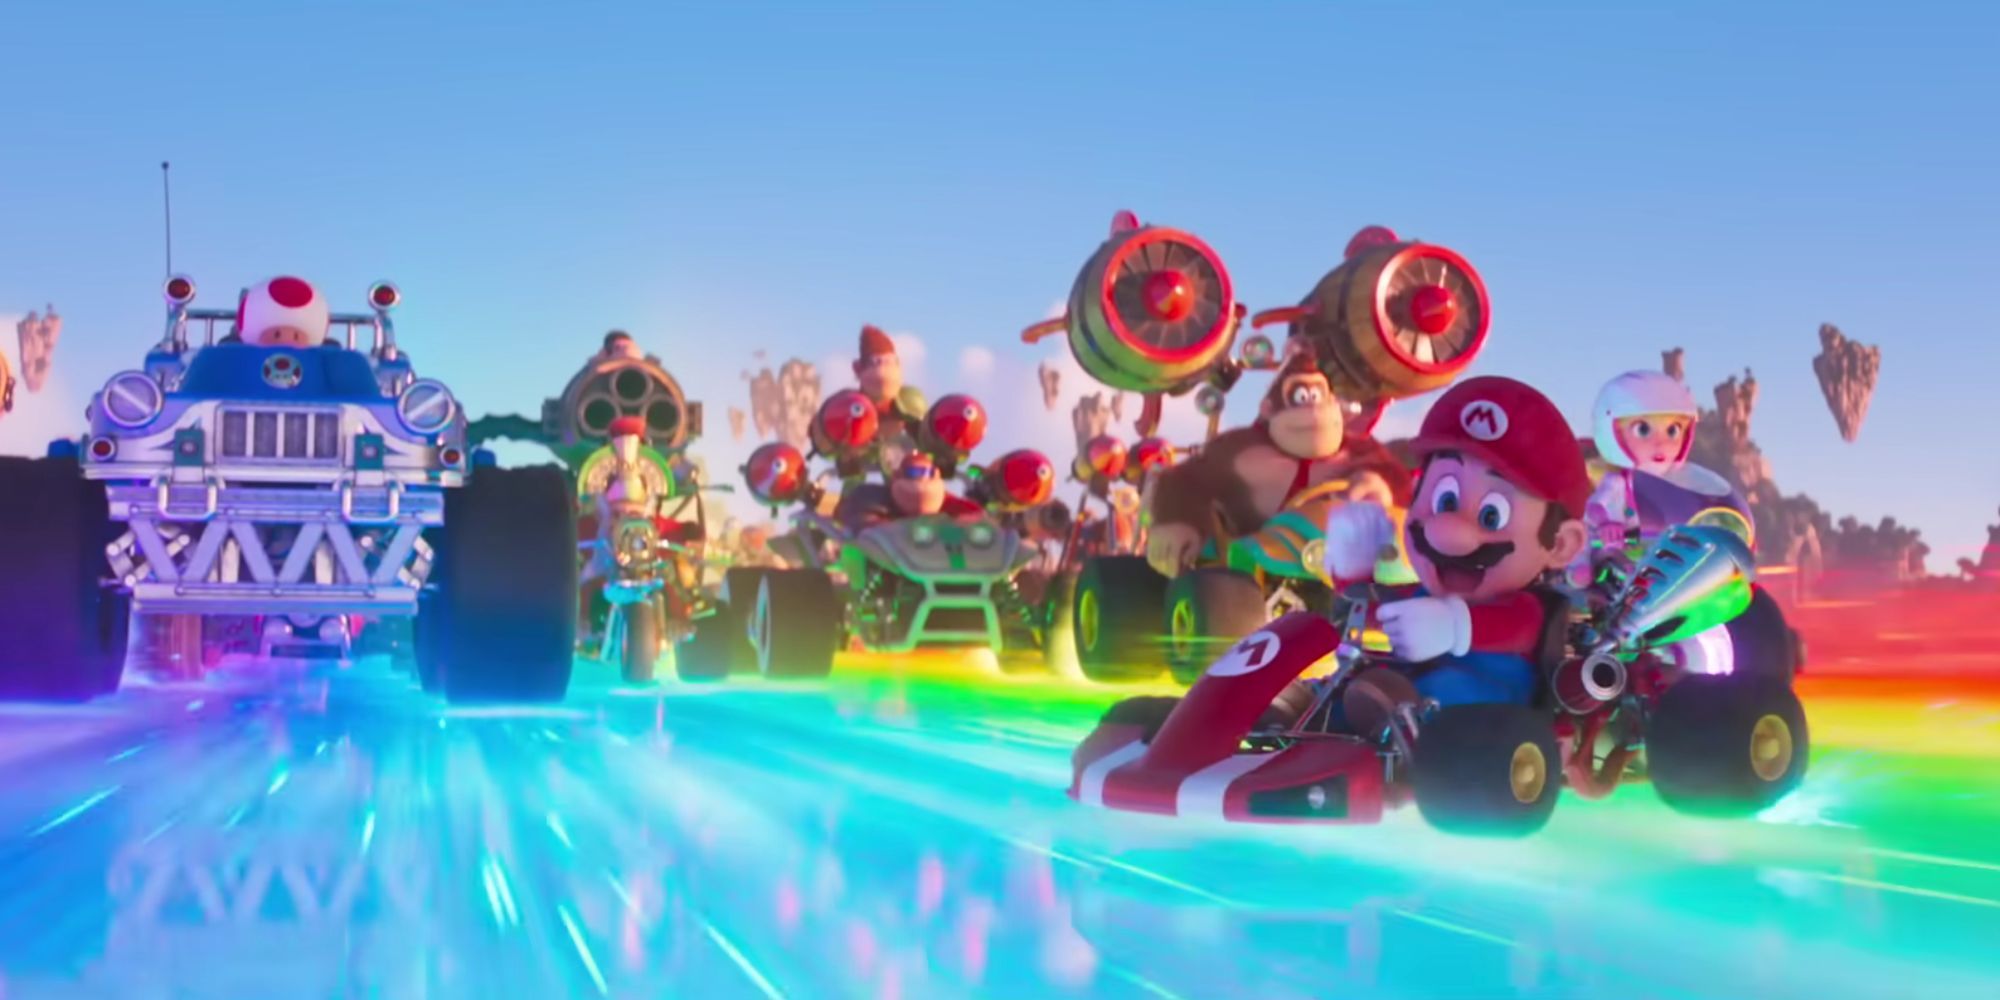 Fans Can't Get Enough Of Warrior Princess Peach In The Second Super Mario  Bros. Movie Trailer